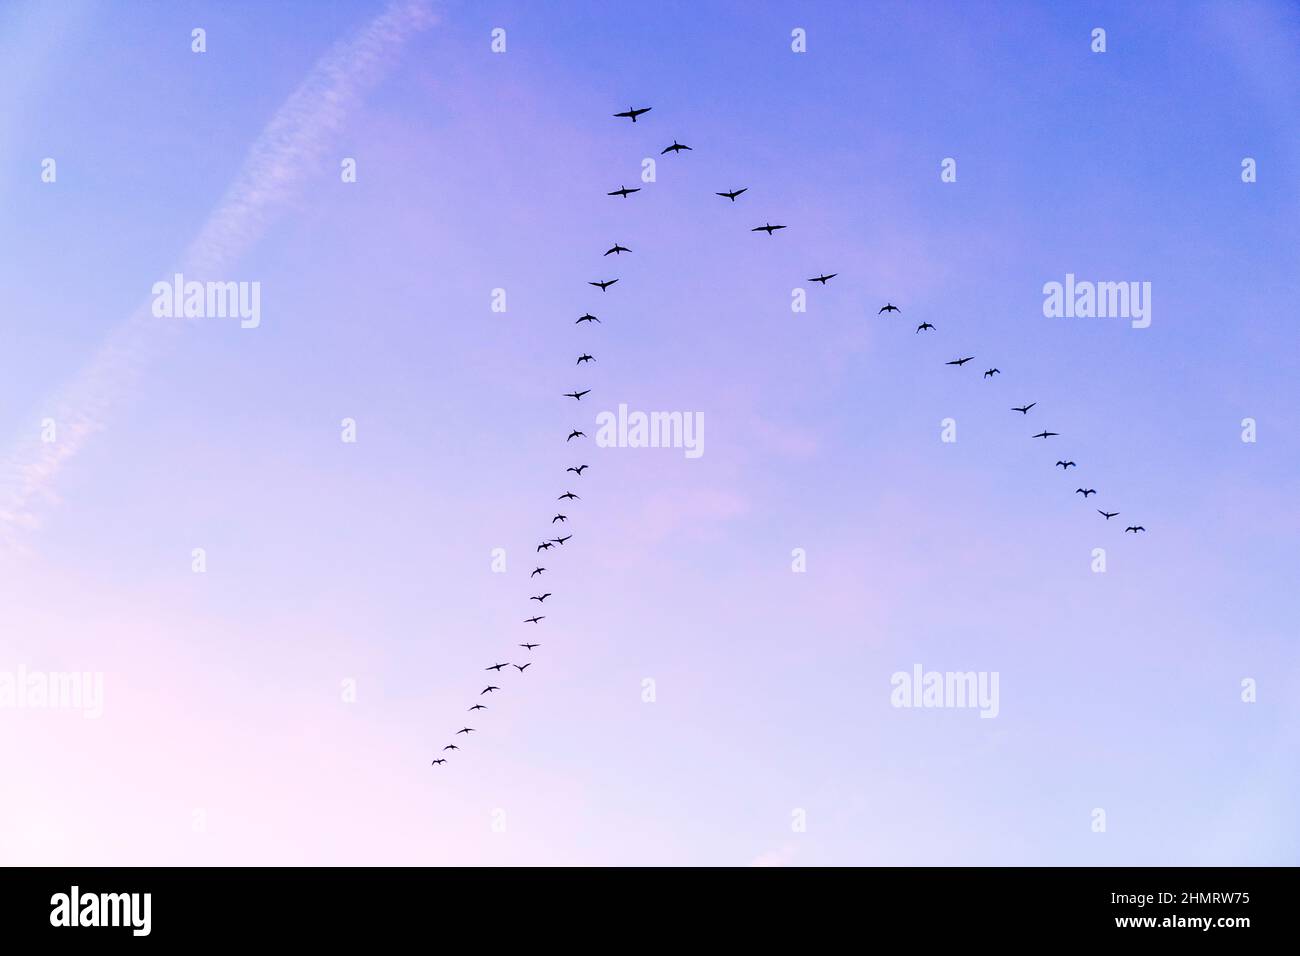 A V shaped formation, echelon sometimes called skein, of geese flying overhead in the early morning dawn sky with some very faint cirrostratus clouds and contrail. Stock Photo